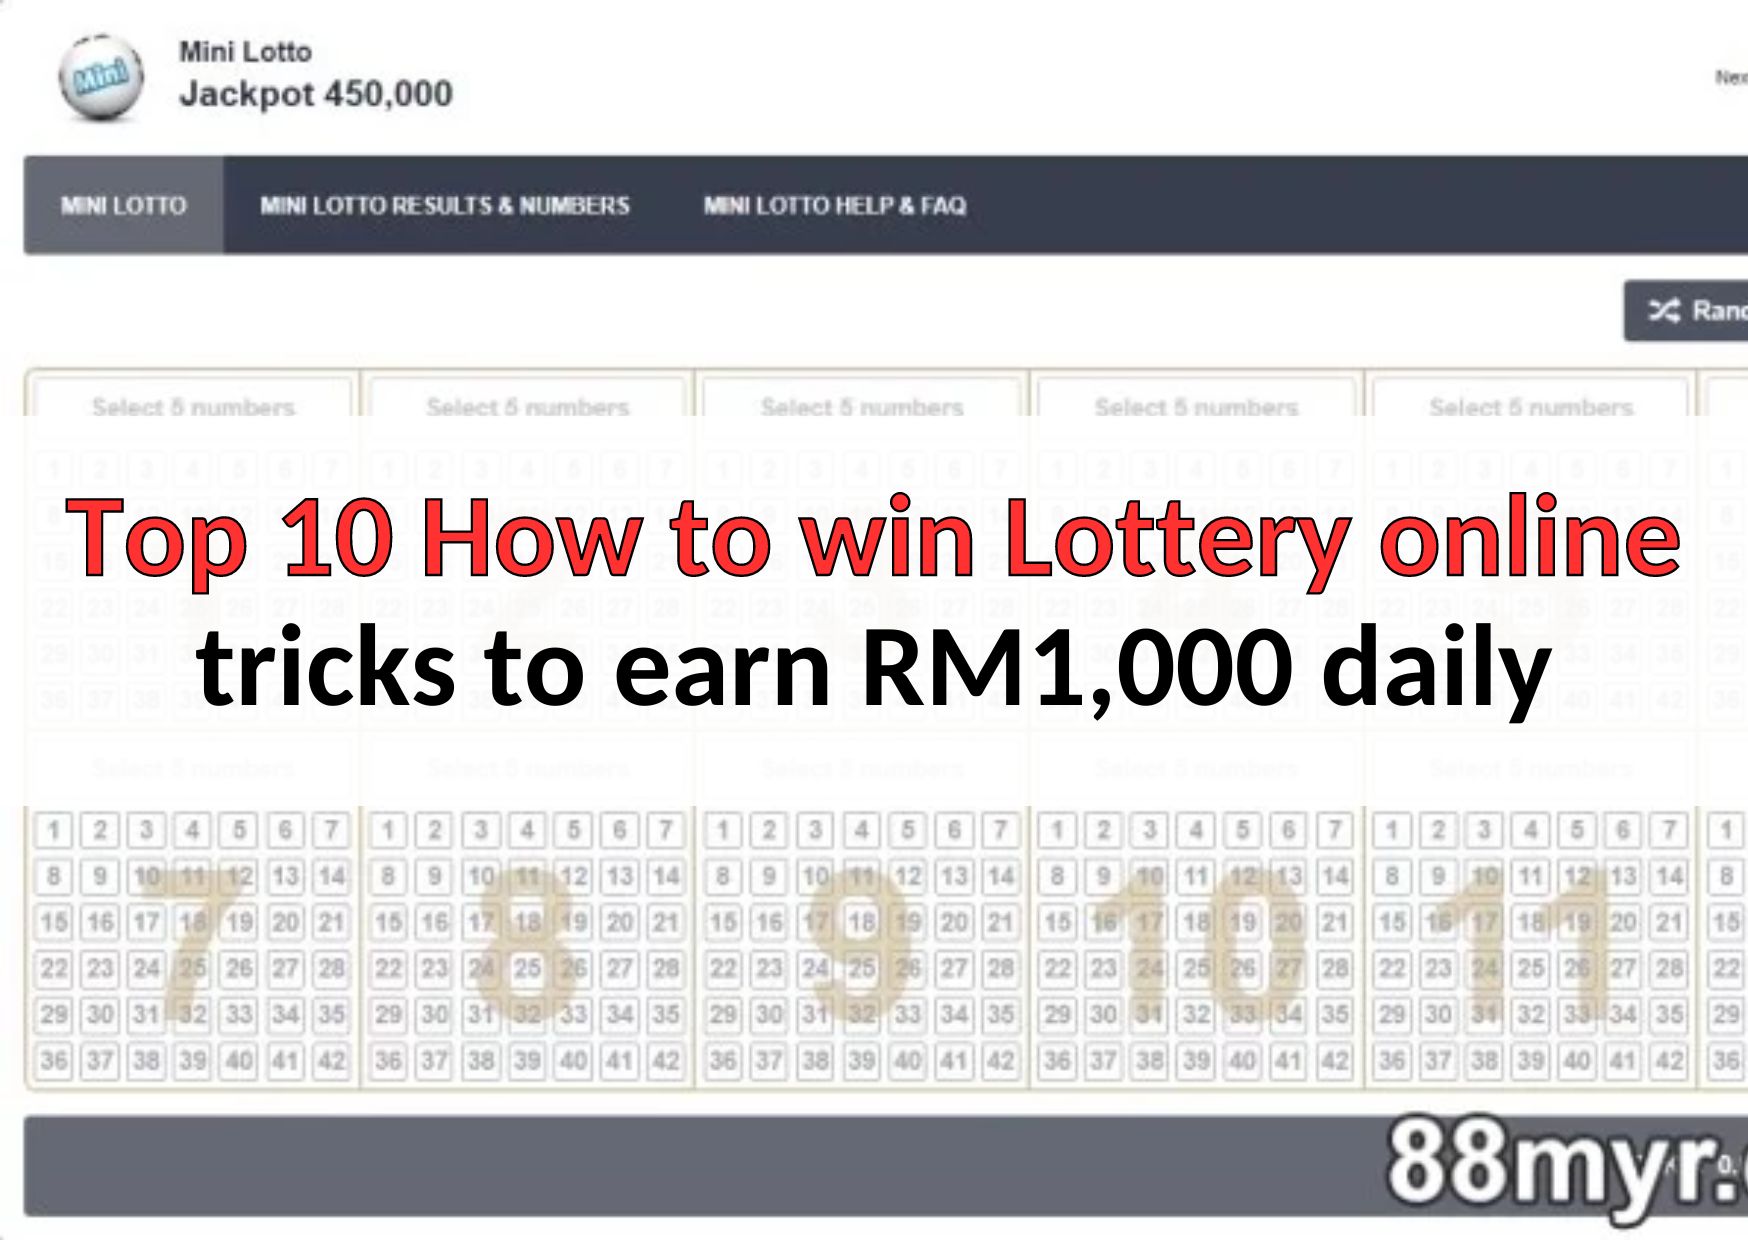 Top 10 How to win Lottery online tricks to earn RM1,000 daily